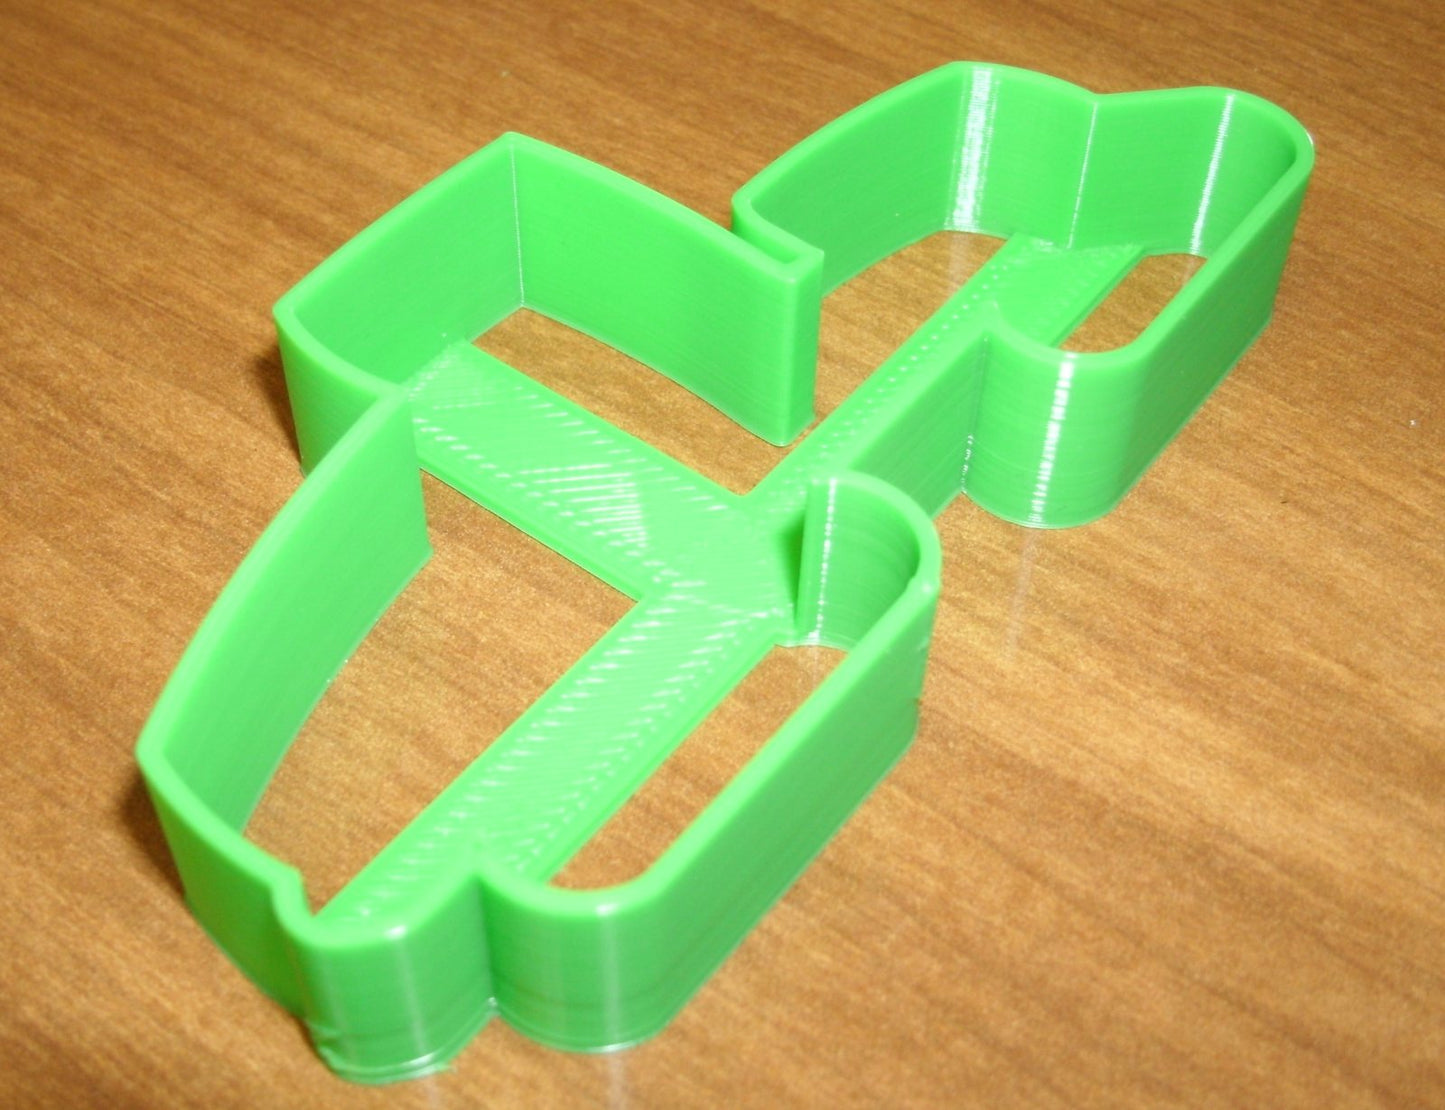 Green Tractor Tracked Farm Vehicle Equipment Agriculture Cookie Cutter USA PR700